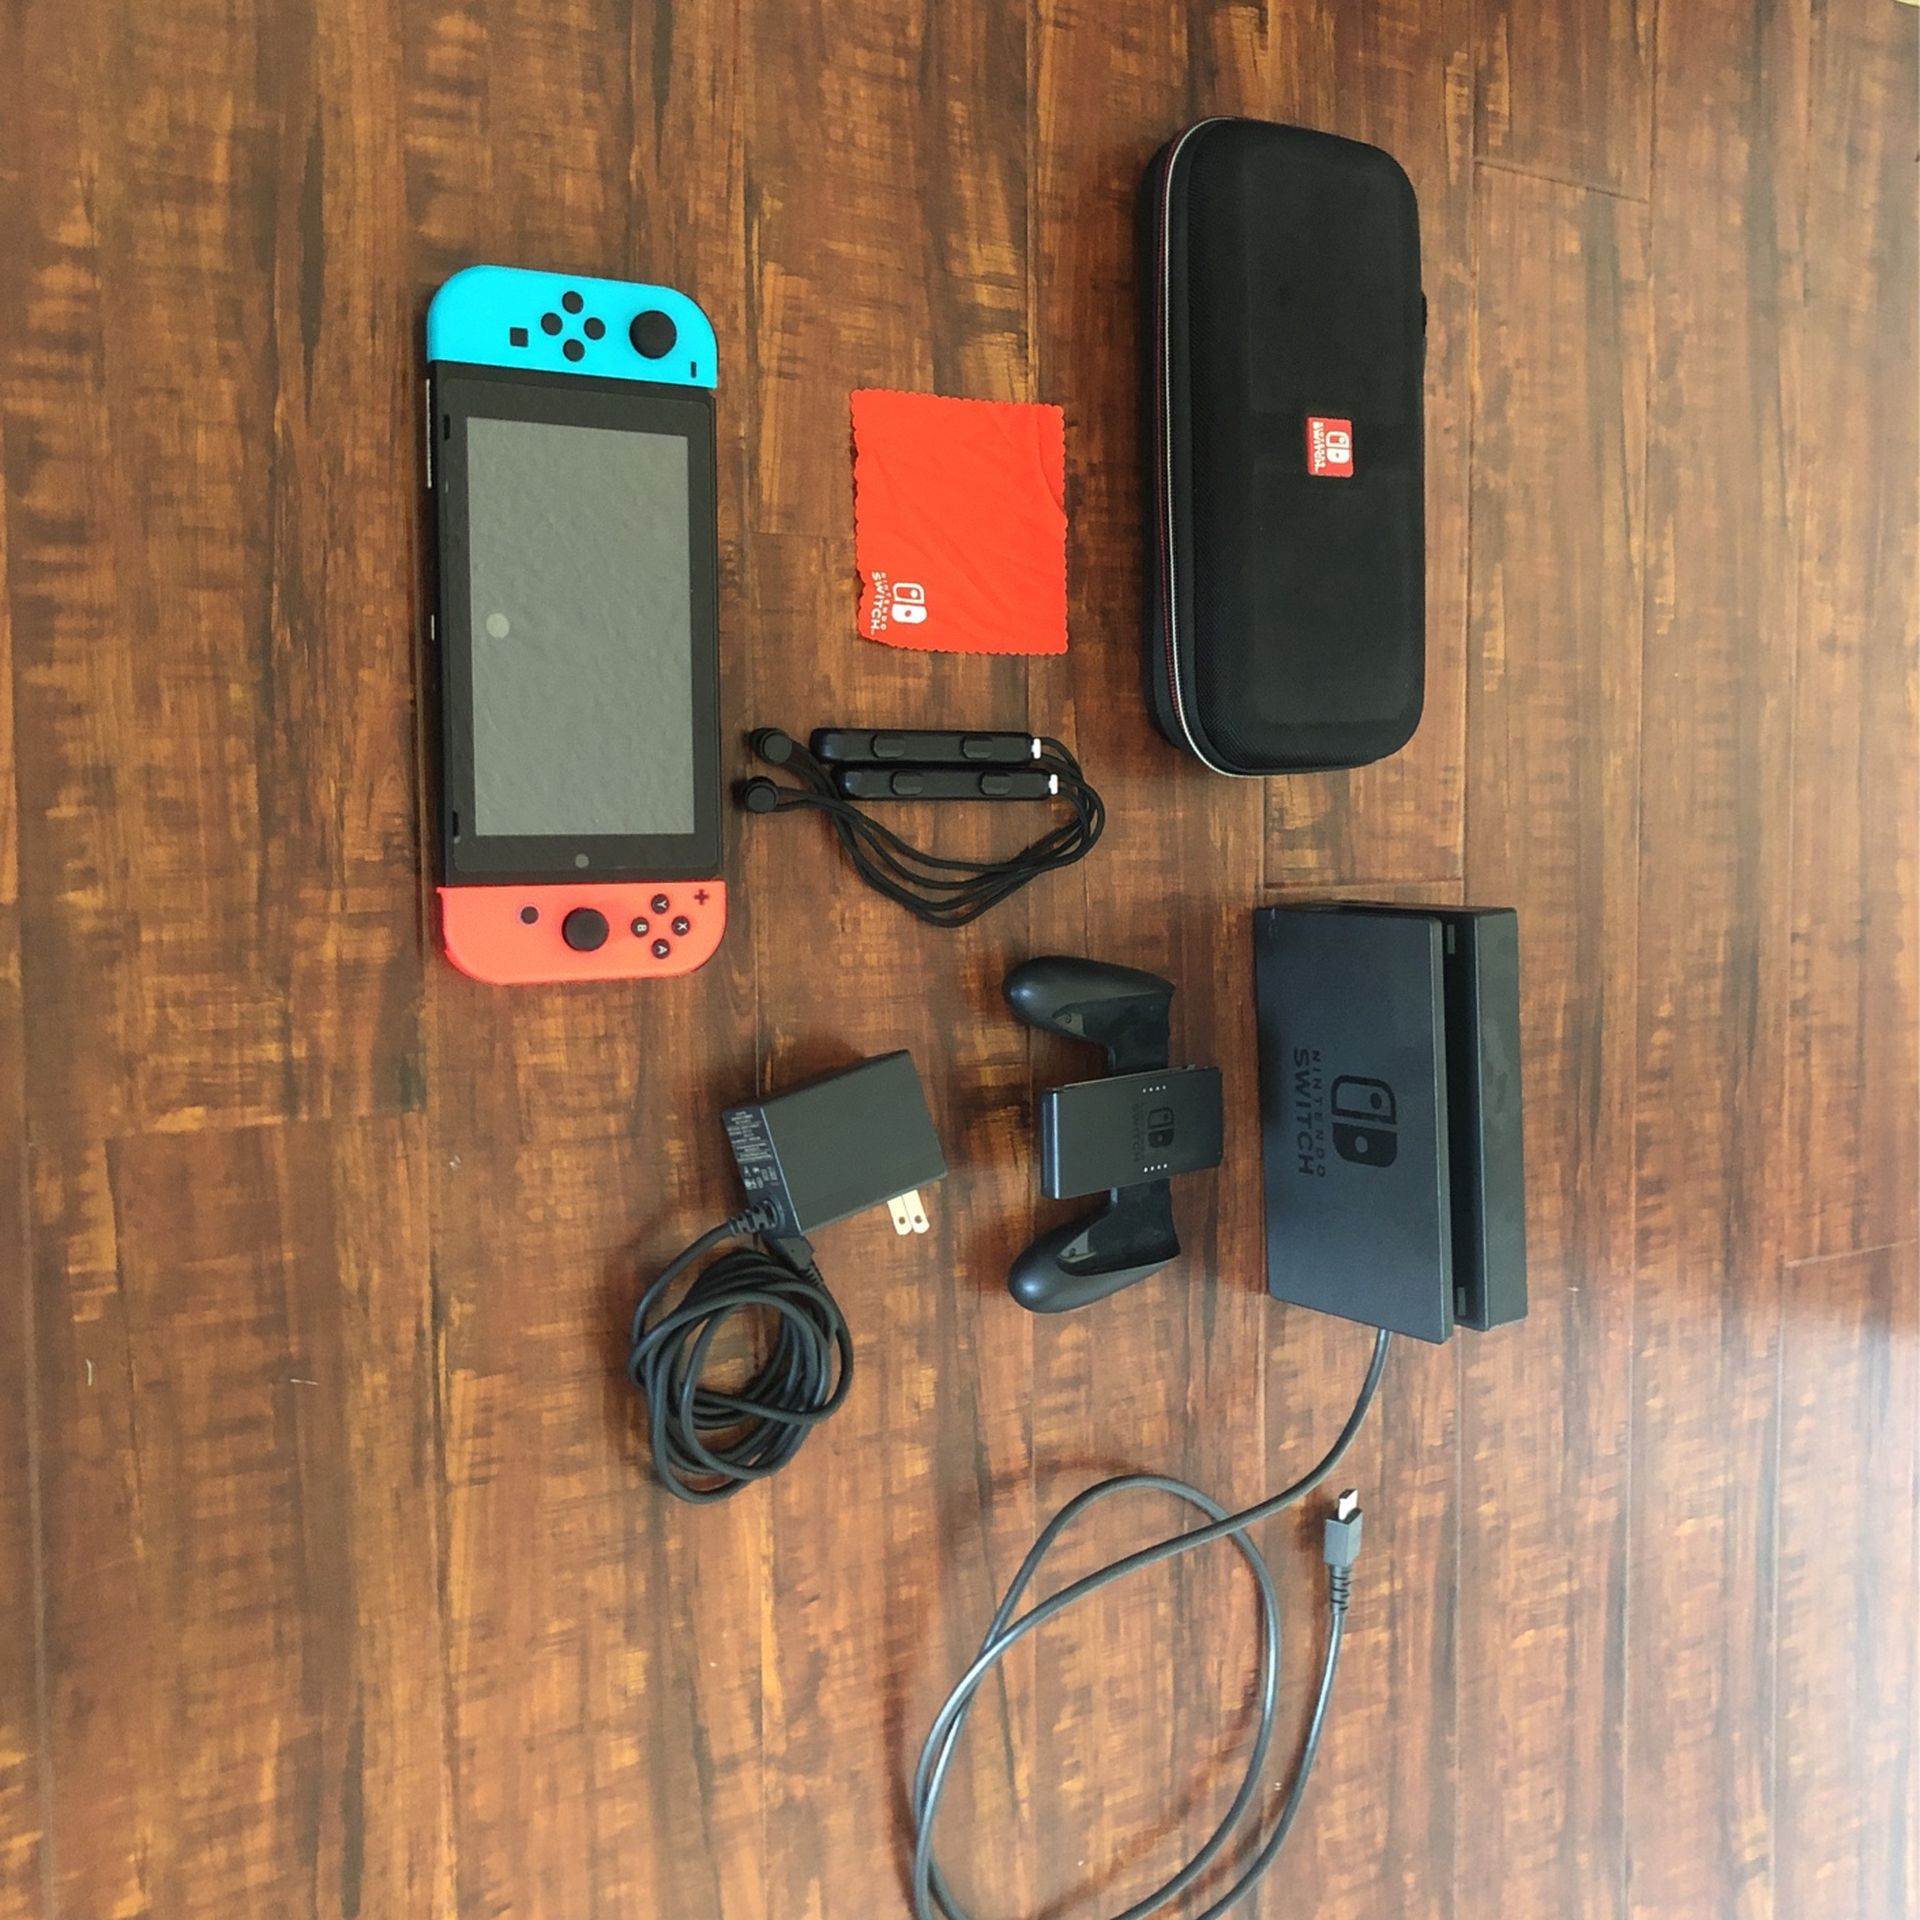 Nintendo Switch with carrier case and all cables